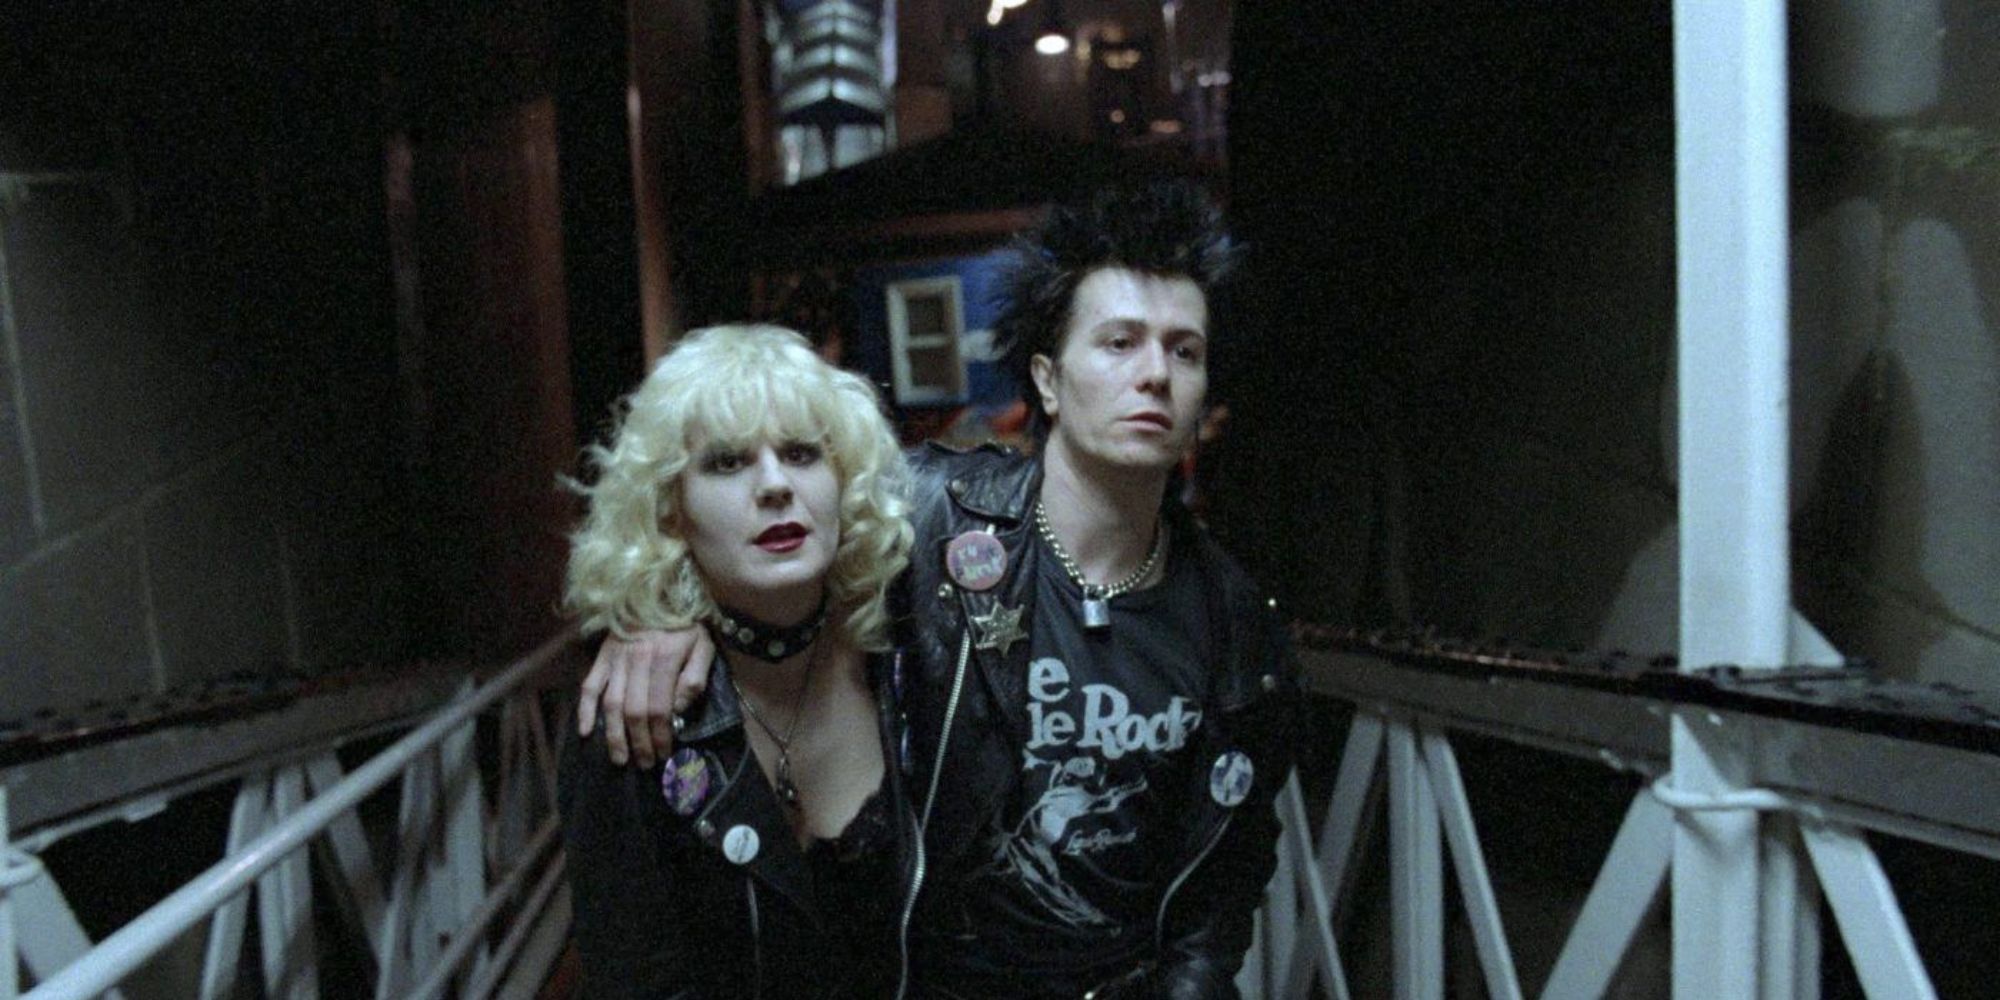 Sid and Nancy walking up a ramp with Sid's arm around Nancy's shoulder in the Sid &amp; Nancy movie.